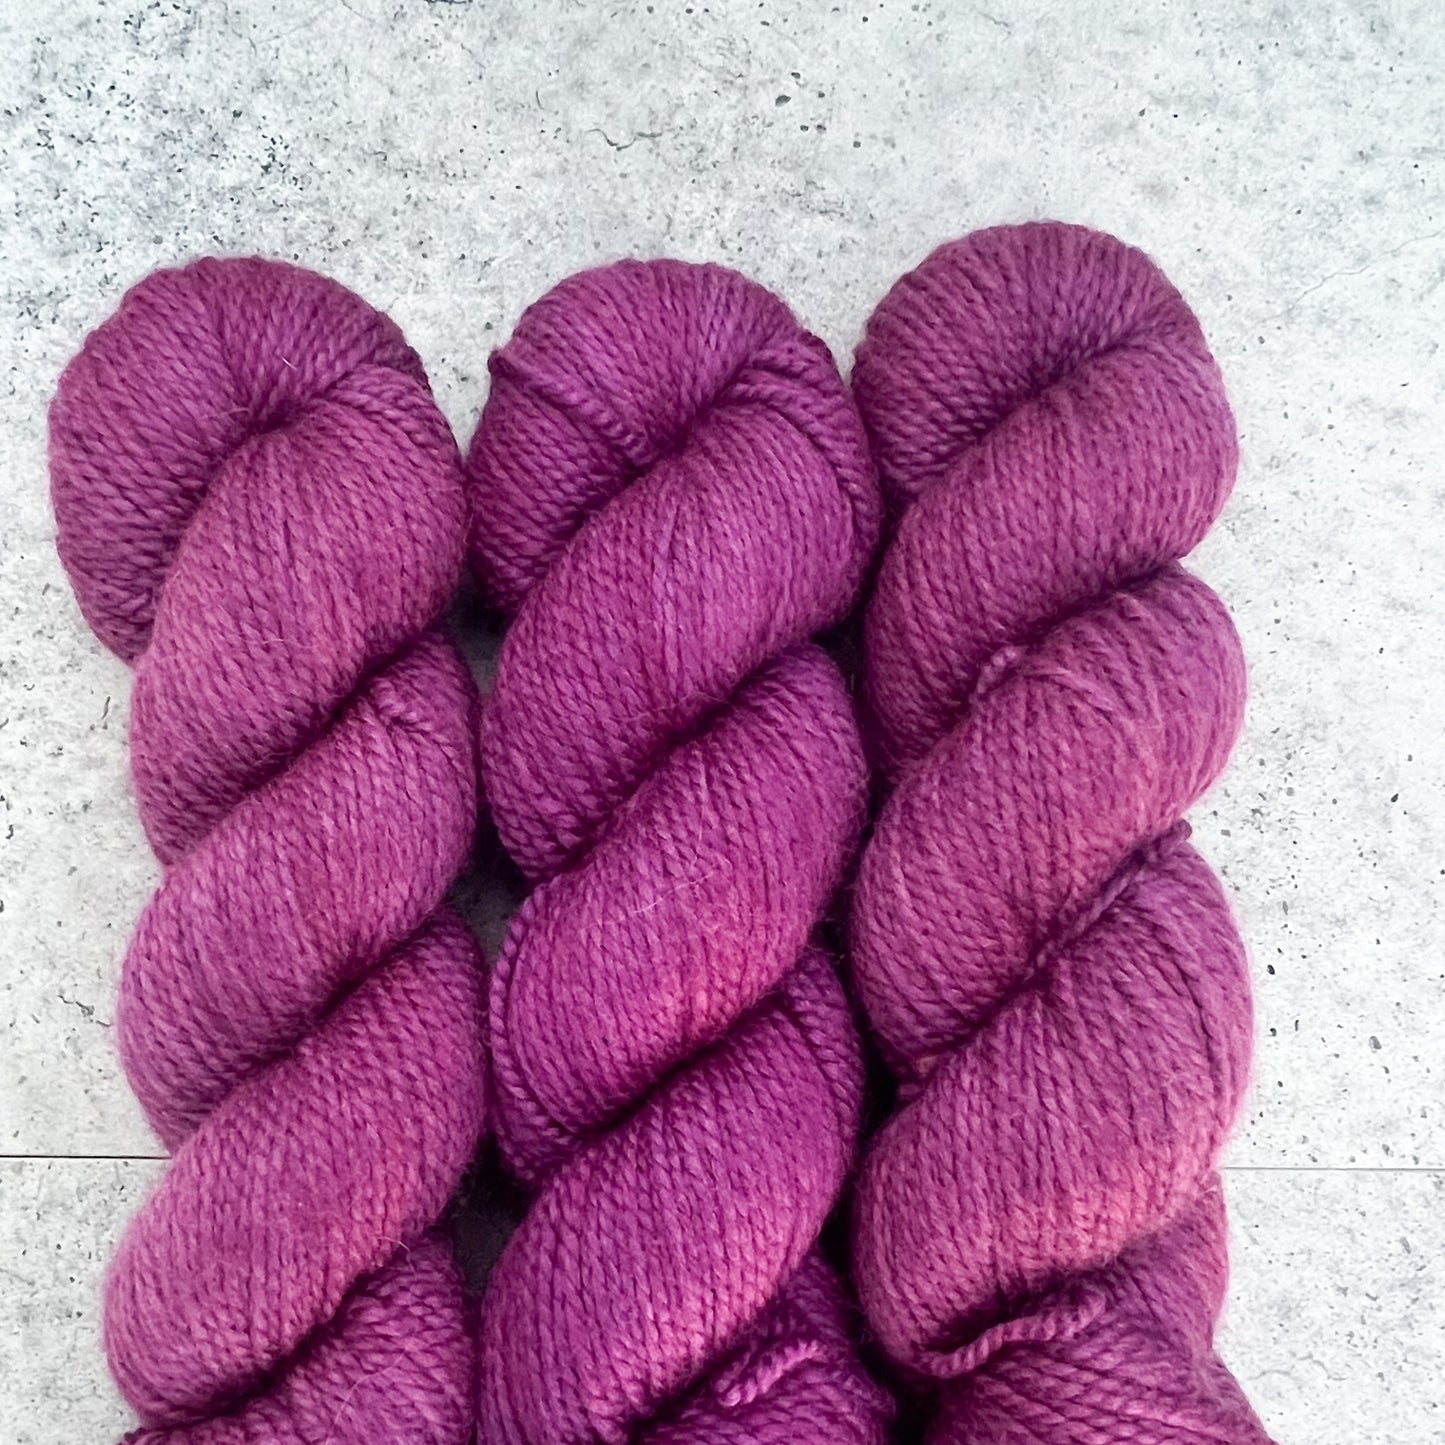 Plum on Uncle Mulberry (Worsted)